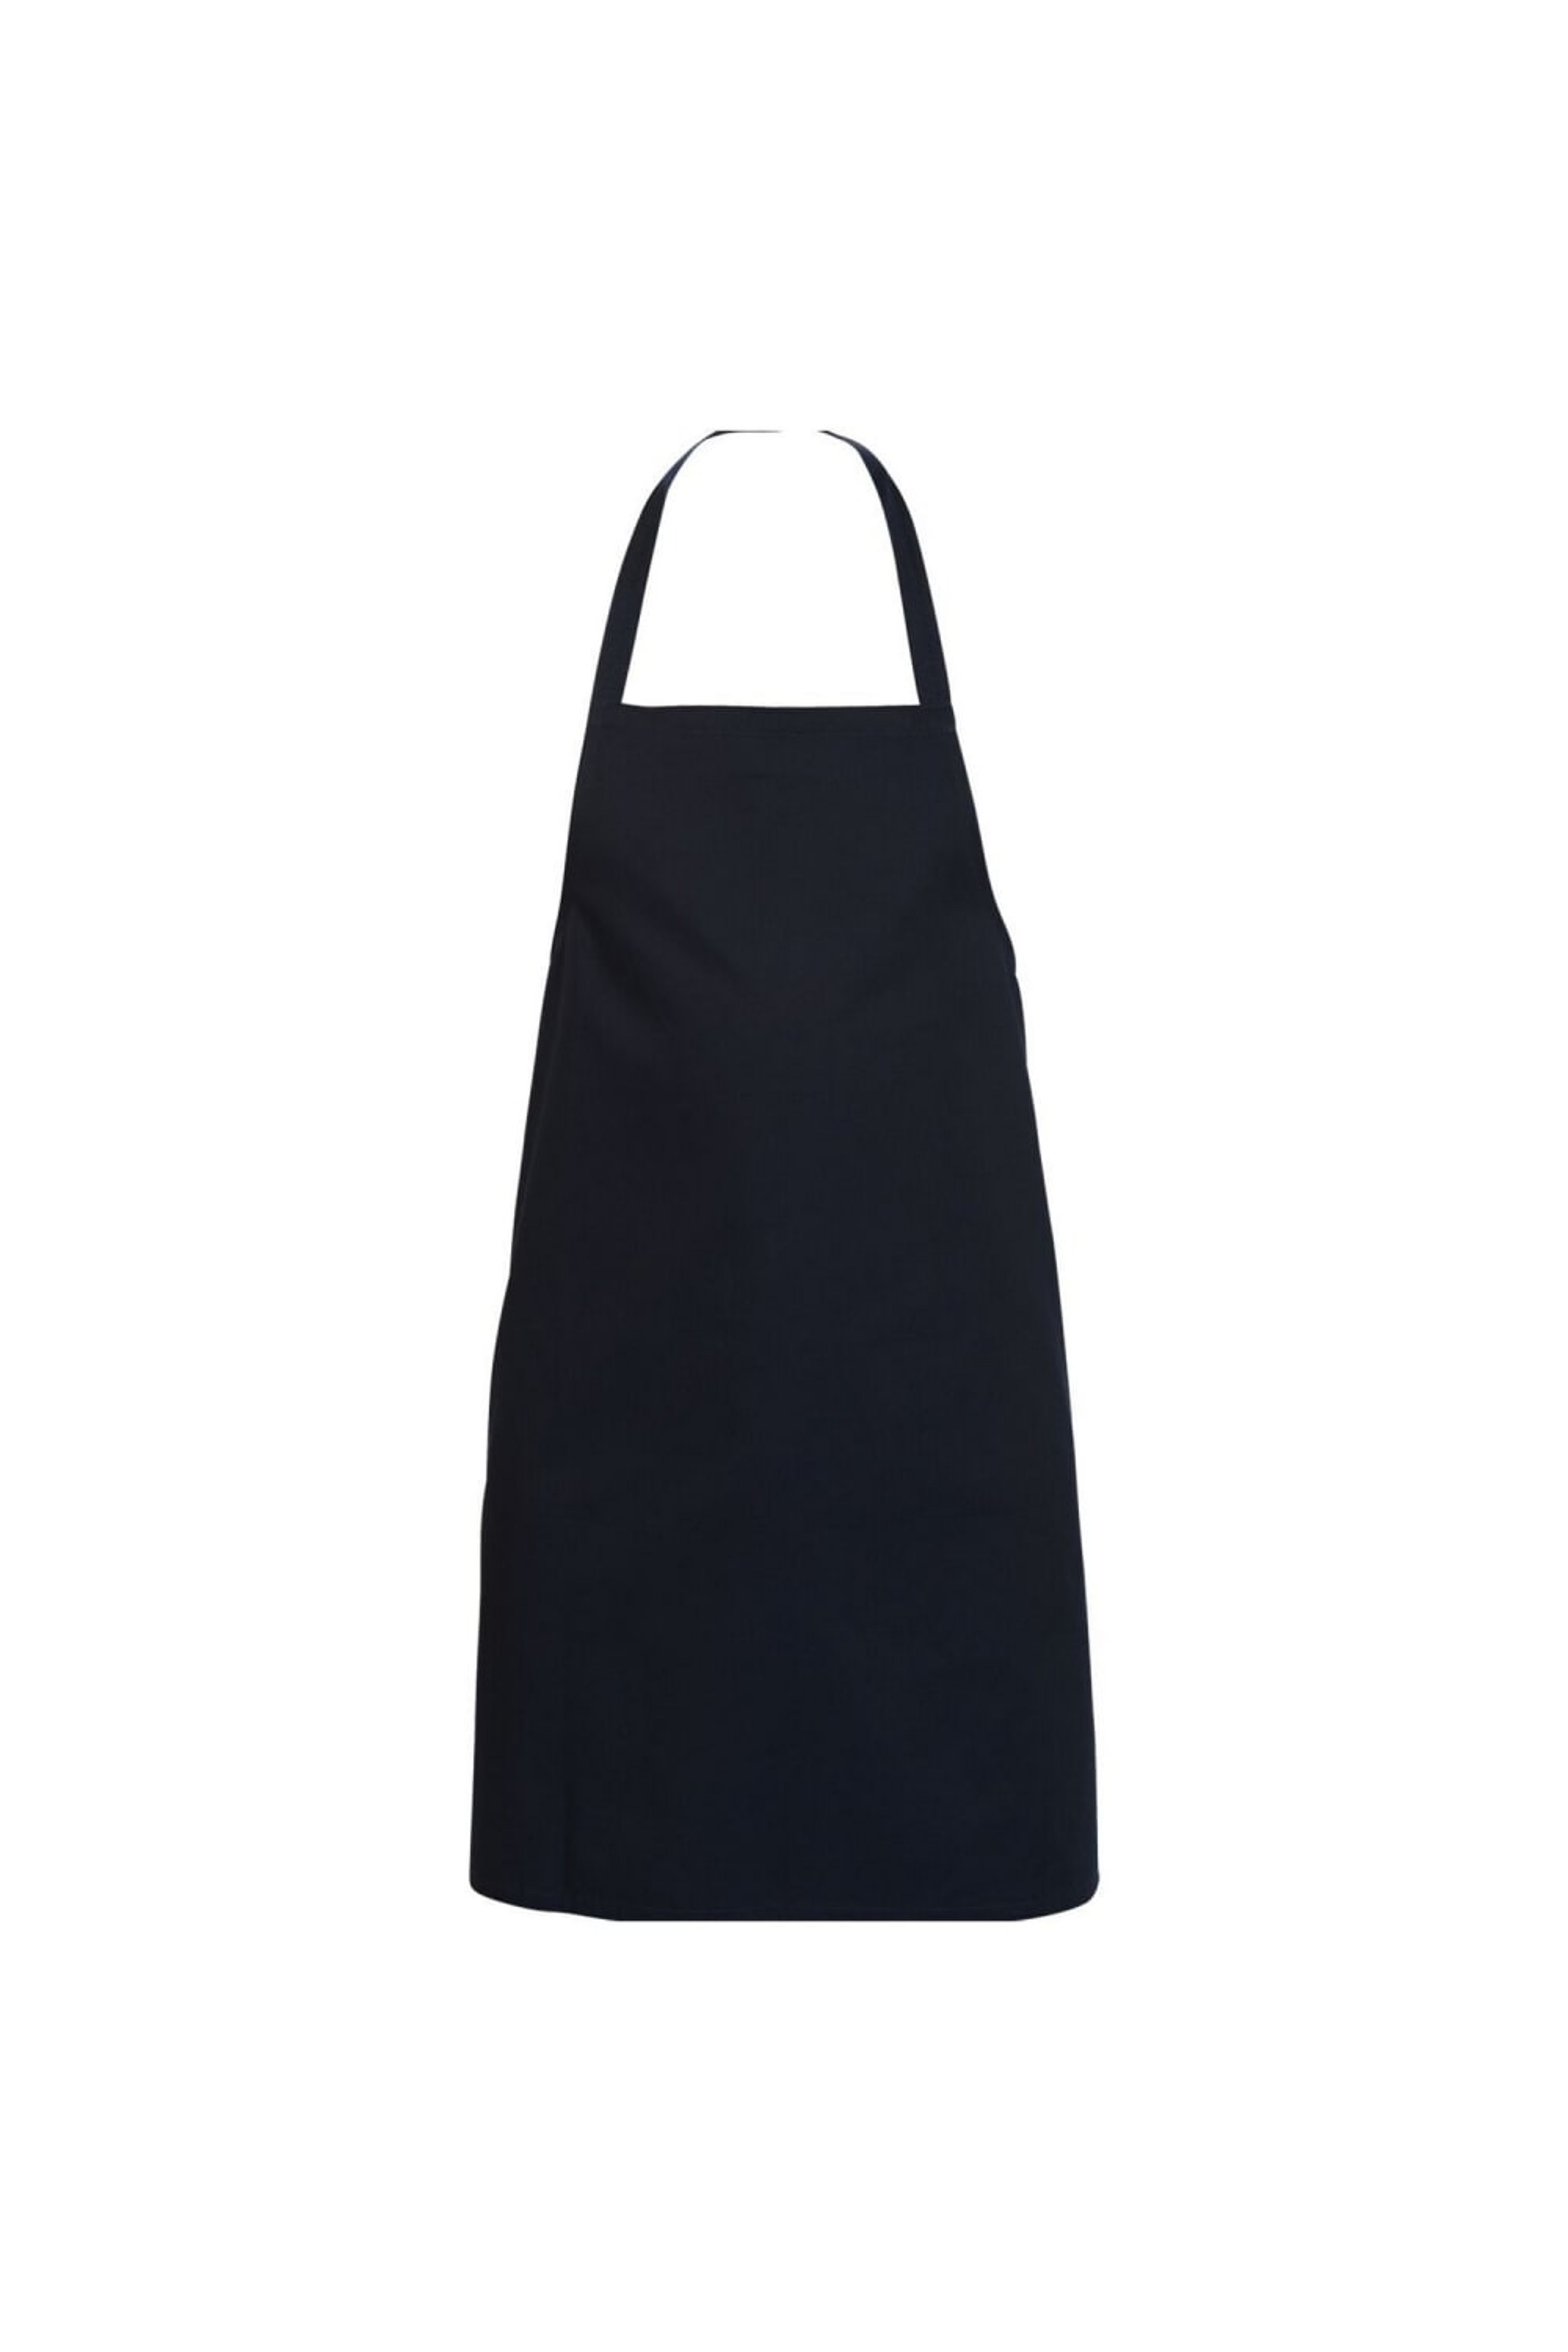 ABSOLUTE APPAREL ABSOLUTE APPAREL ADULTS WORKWEAR FULL LENGTH APRON IN NAVY